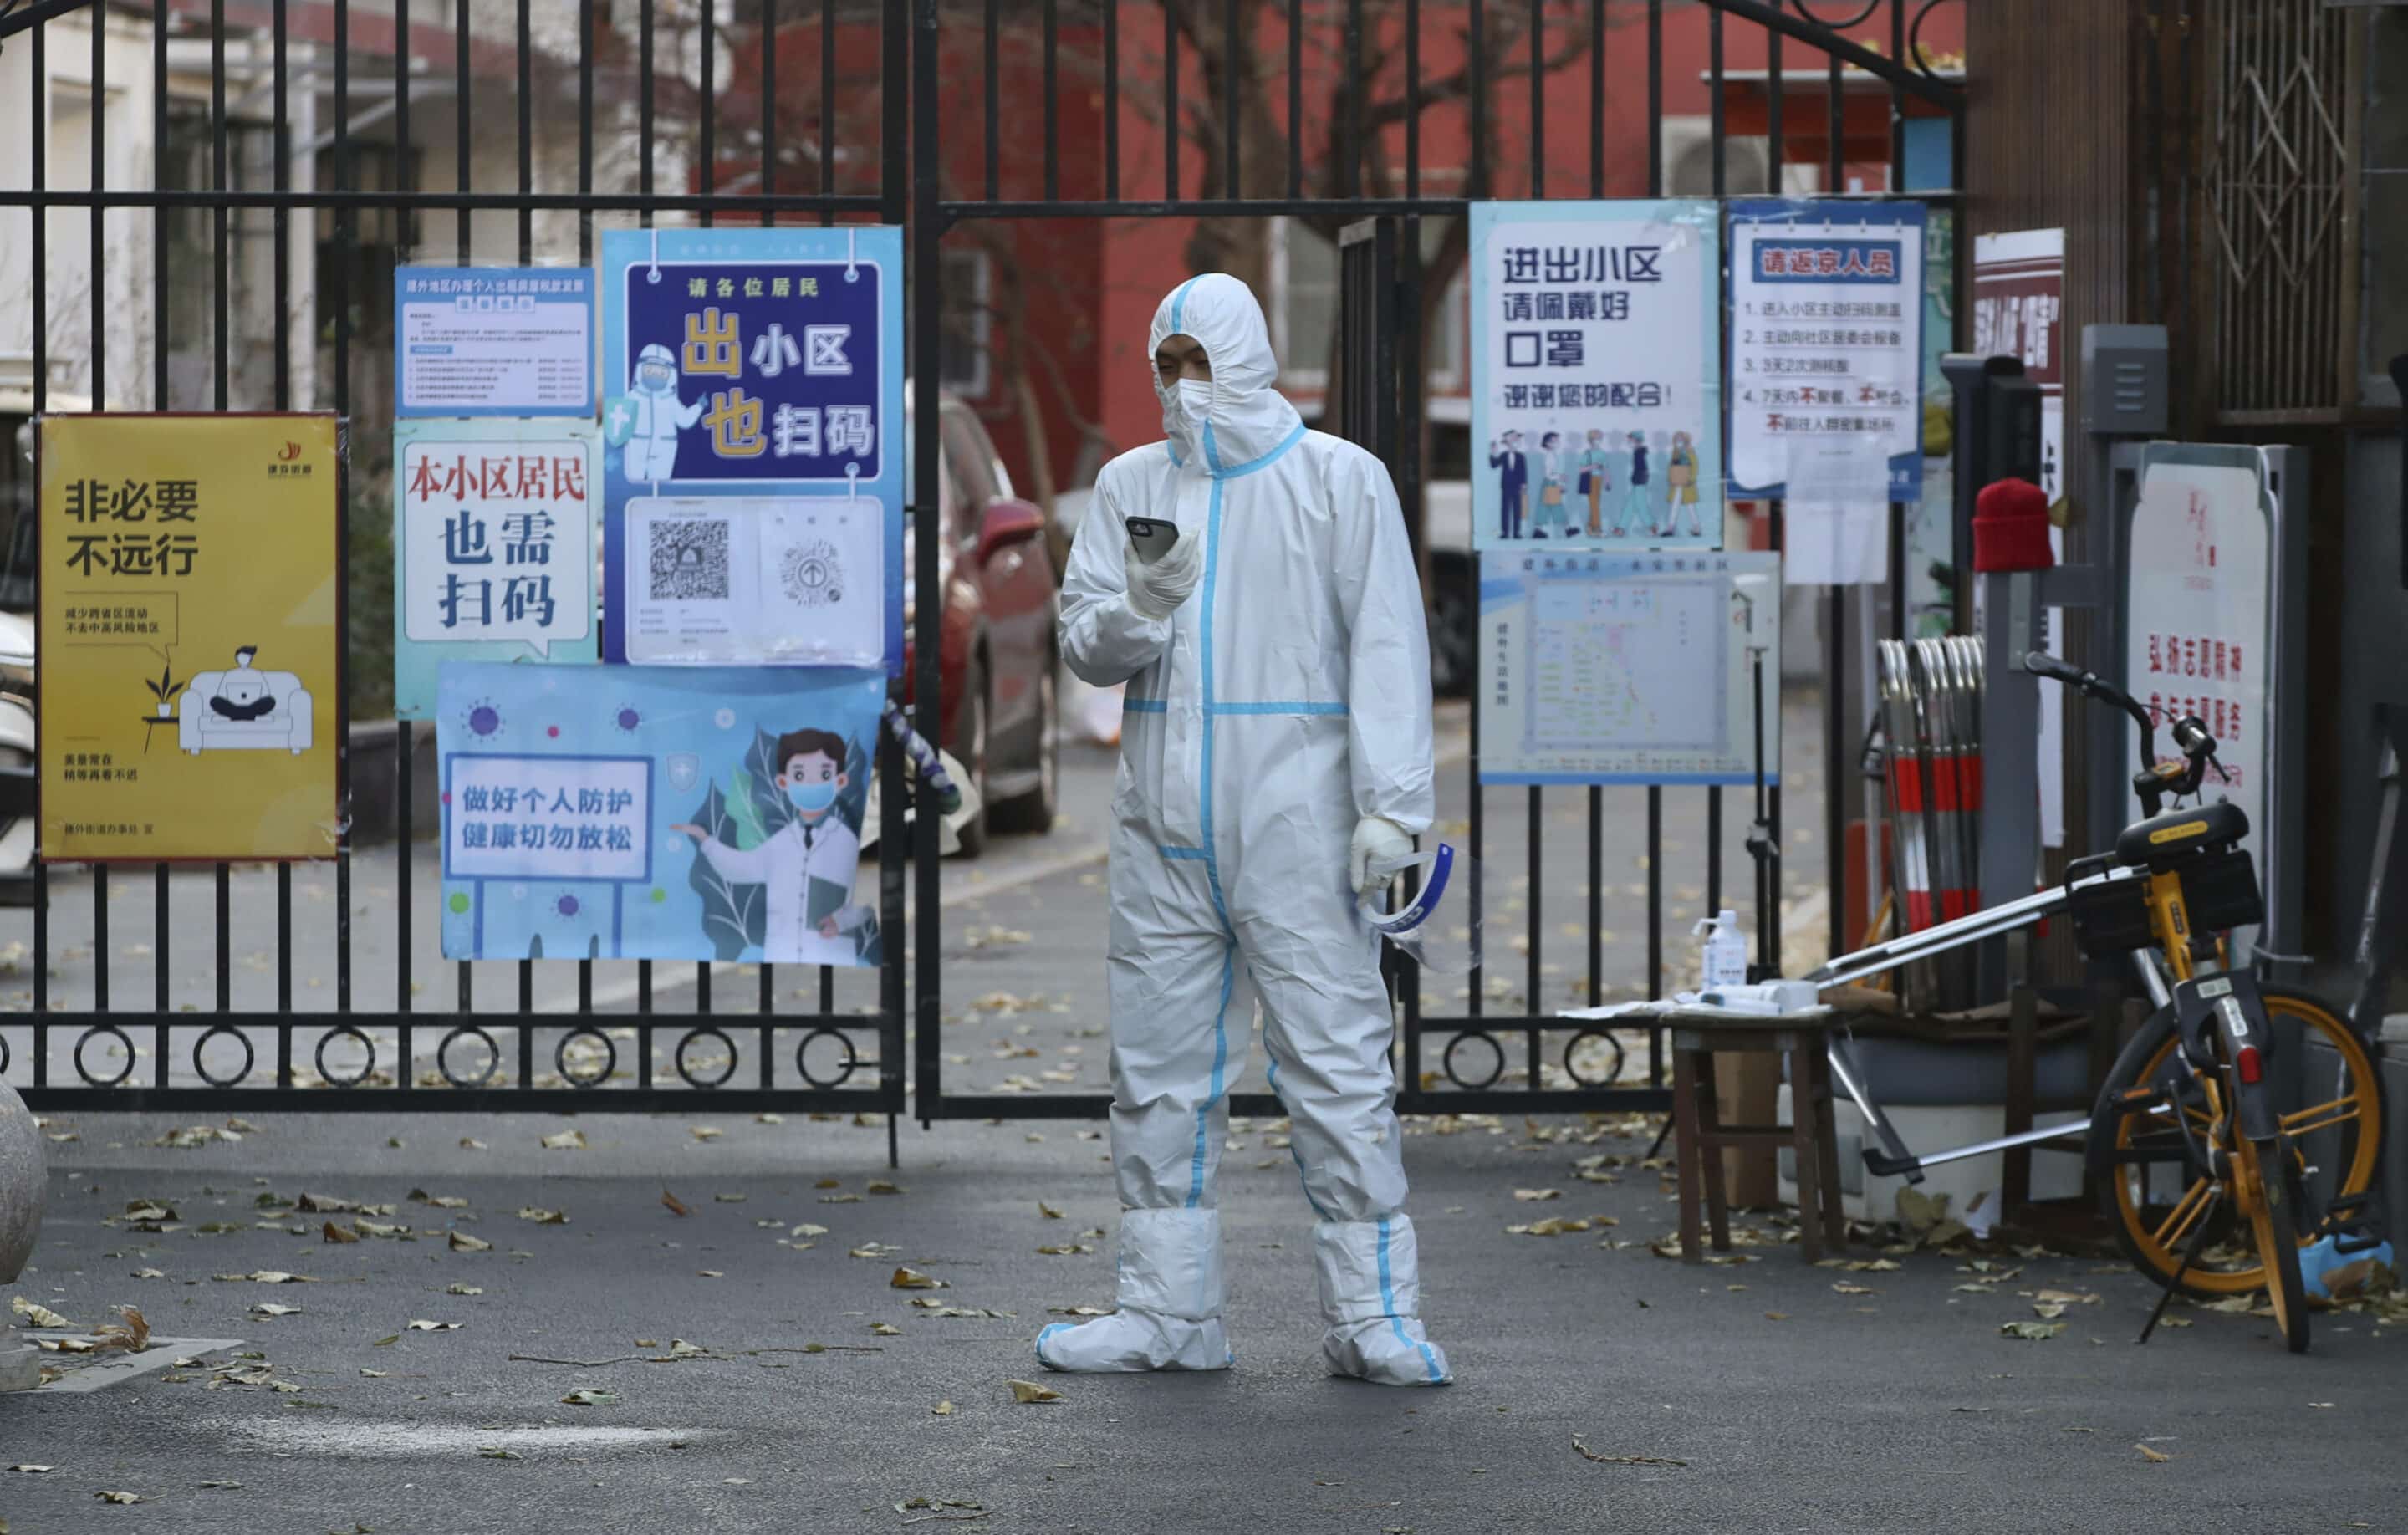 A medical staff wearing a protective suit sets up a barricade at a closed housing complex in order to prevent widespread COVID-19 in Beijing, China on Nov. 29, 2022. ( The Yomiuri Shimbun via AP Images )/YOMIU/22333549511461/JAPAN OUT/2211291622